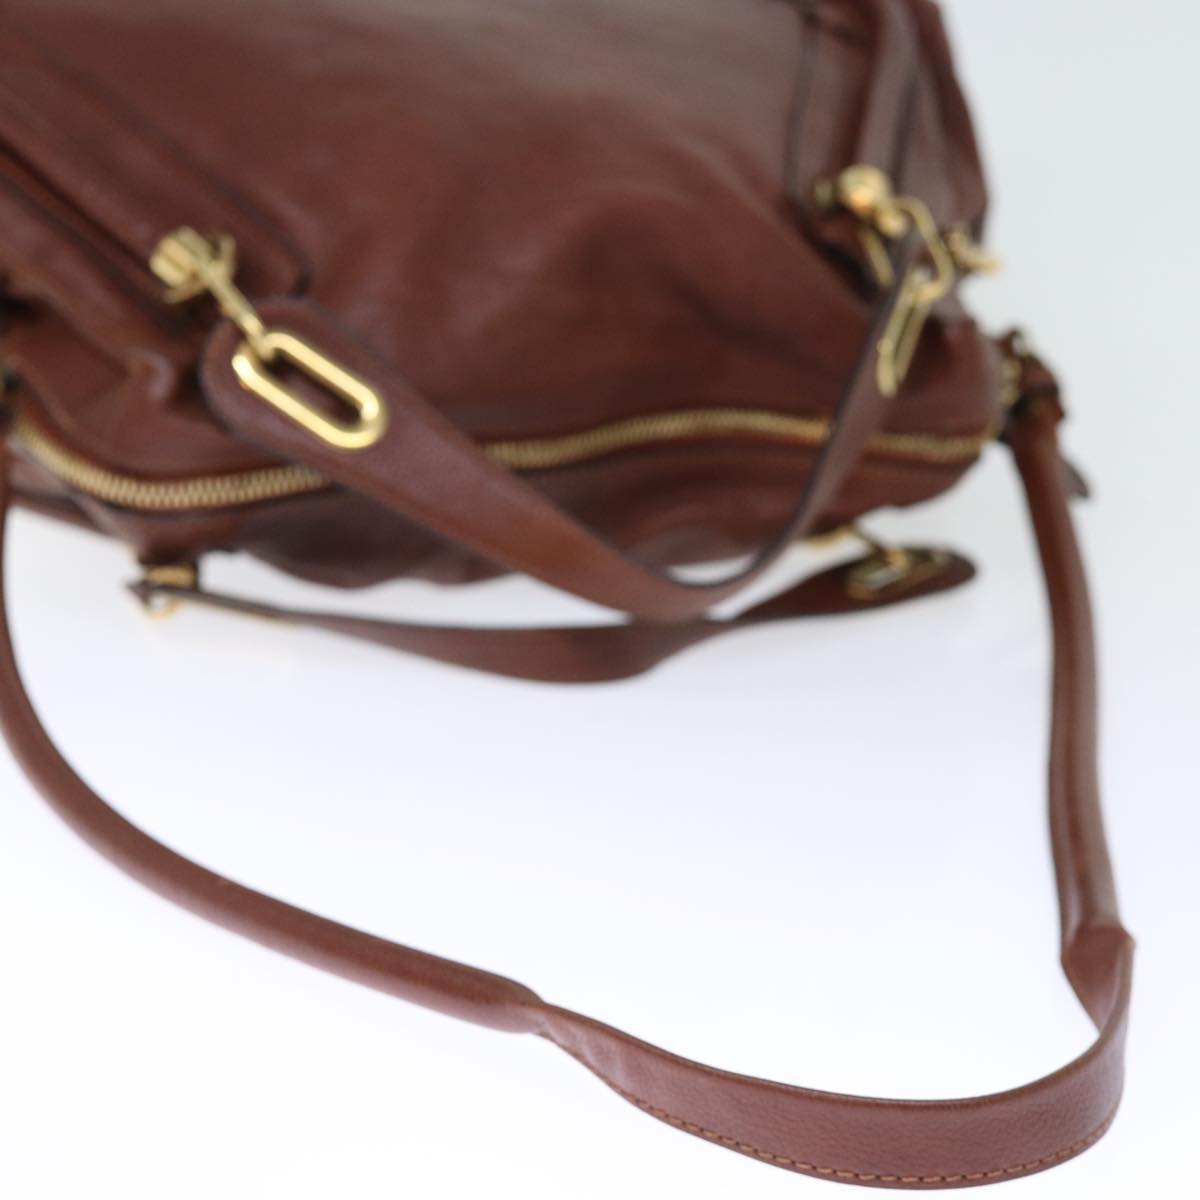 Chloe Mercy Hand Bag Leather 2way Brown Auth bs14066